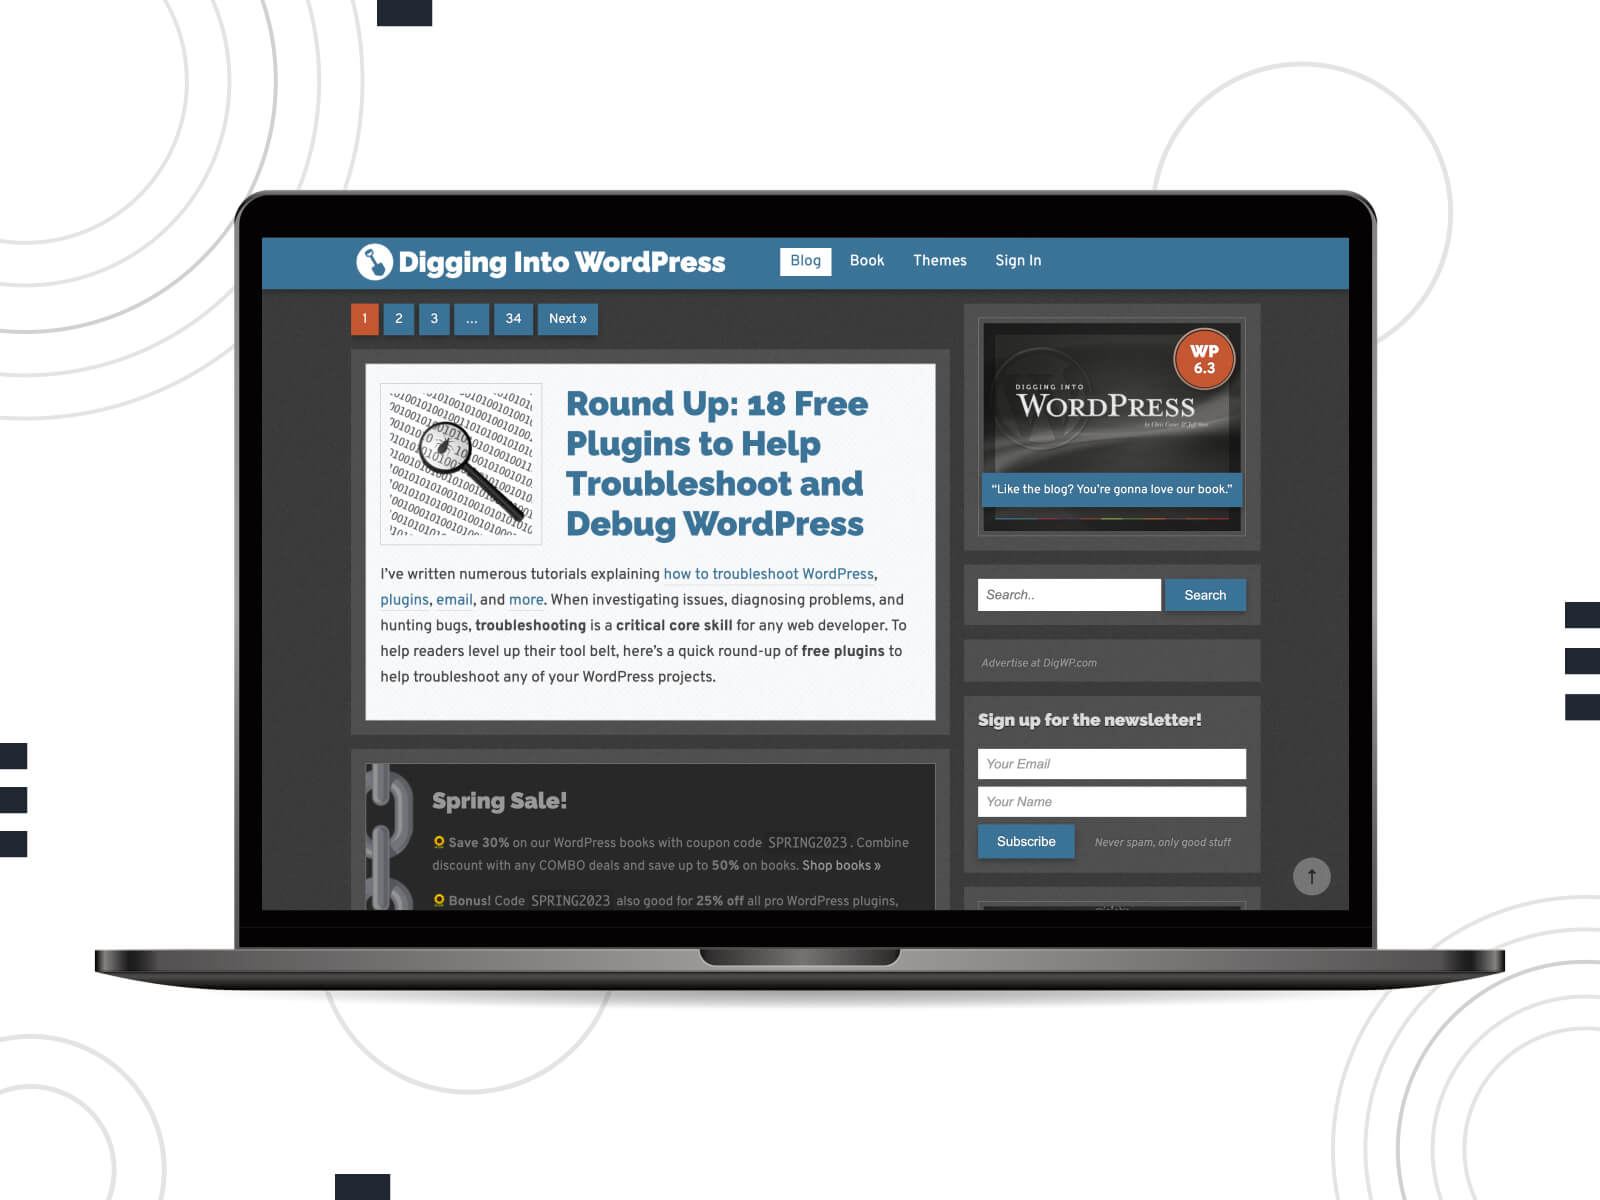 Picture of Dig WP - rich-content WordPress site to boost developer knowledge in dark gray, and steel blue color palette.